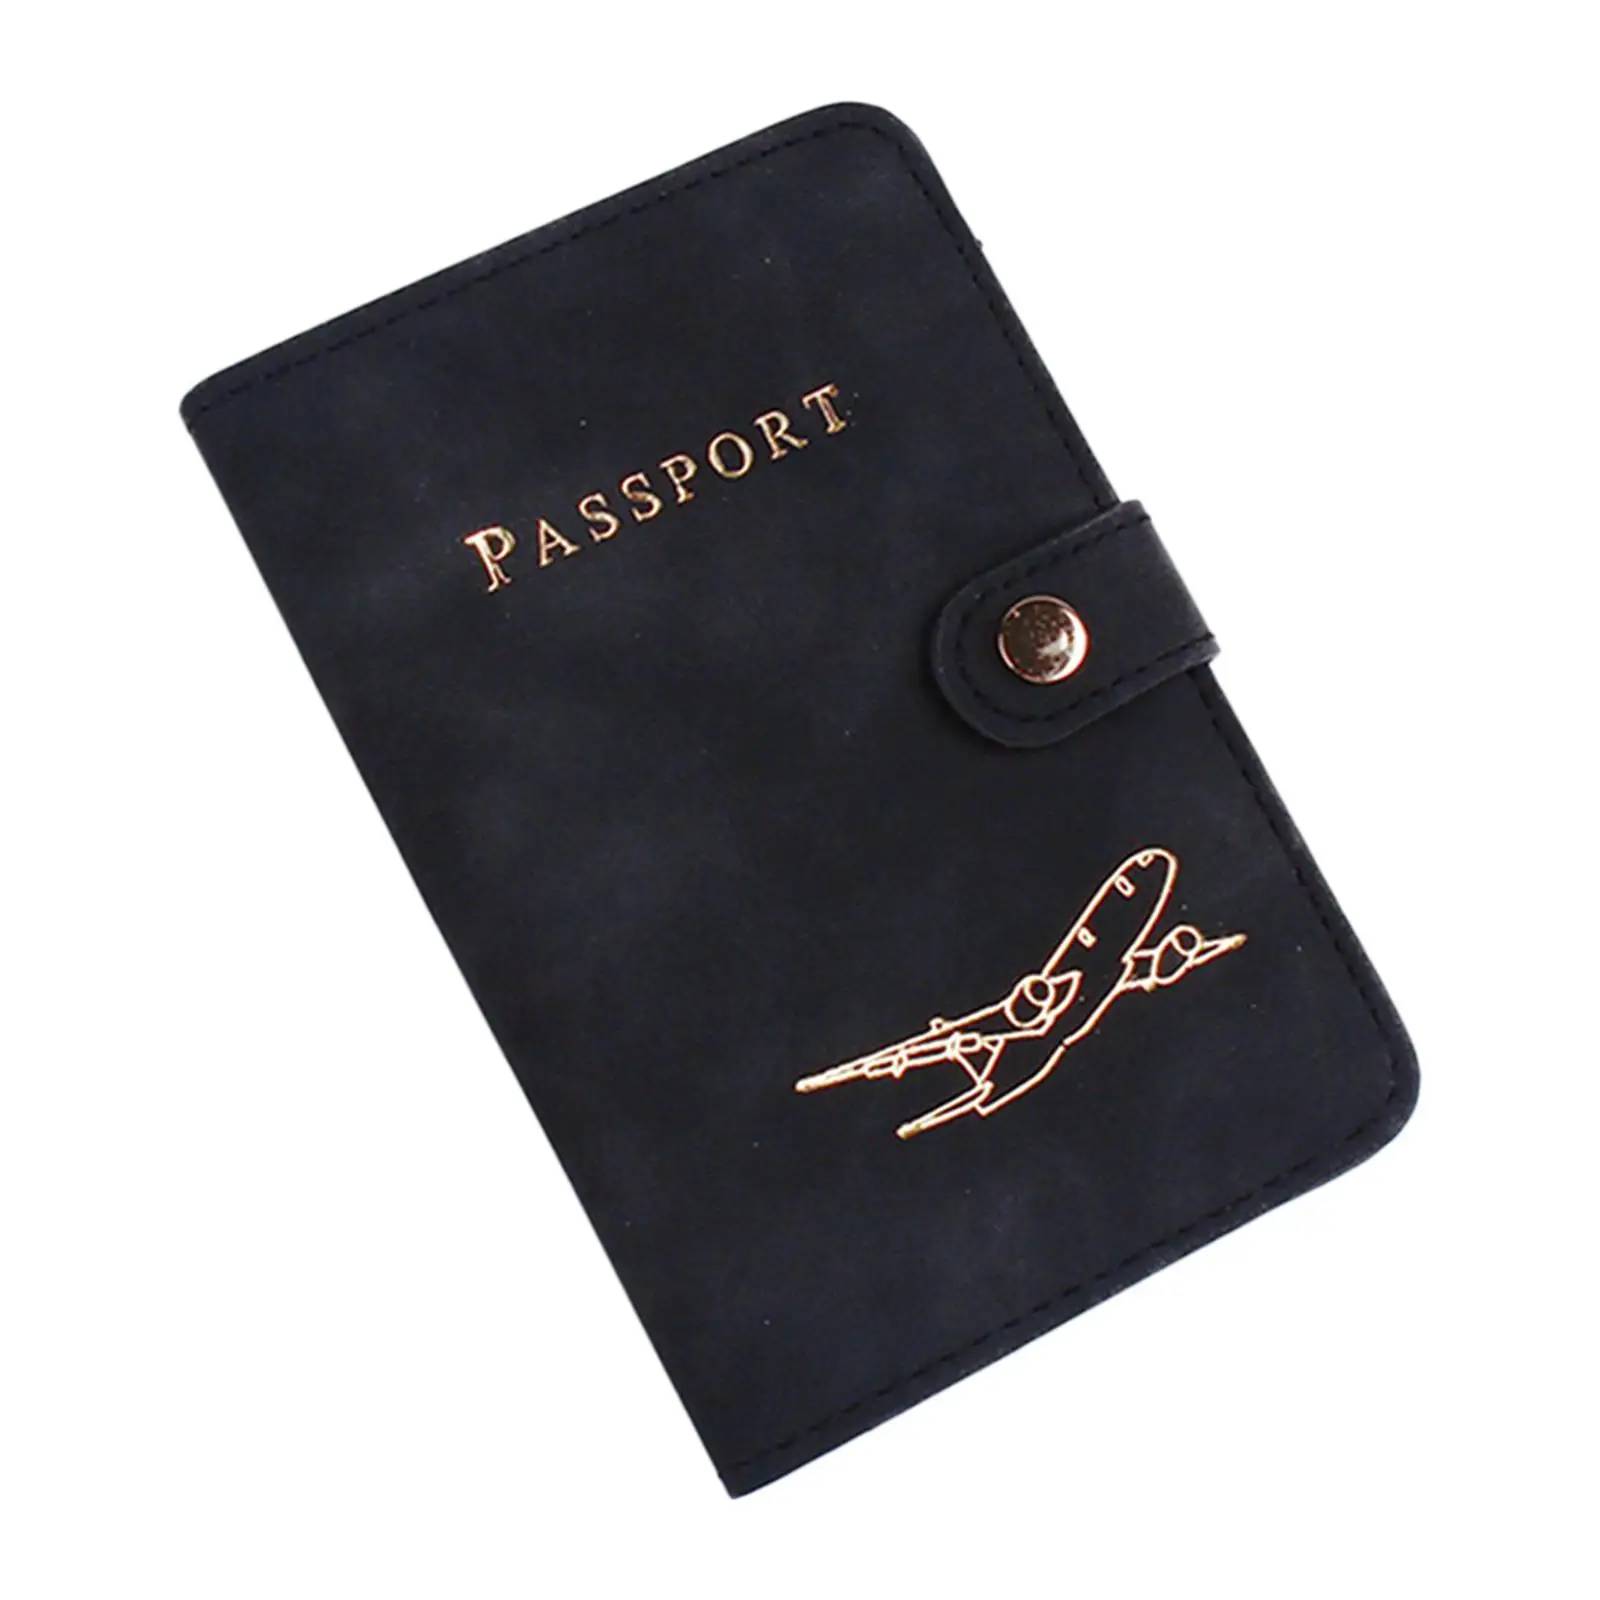 Passport Cover Holder Card Protector Fashionable Good Quality 14.5x10x1cm Travel Gift PU Leather Card Holder for Family Vacation